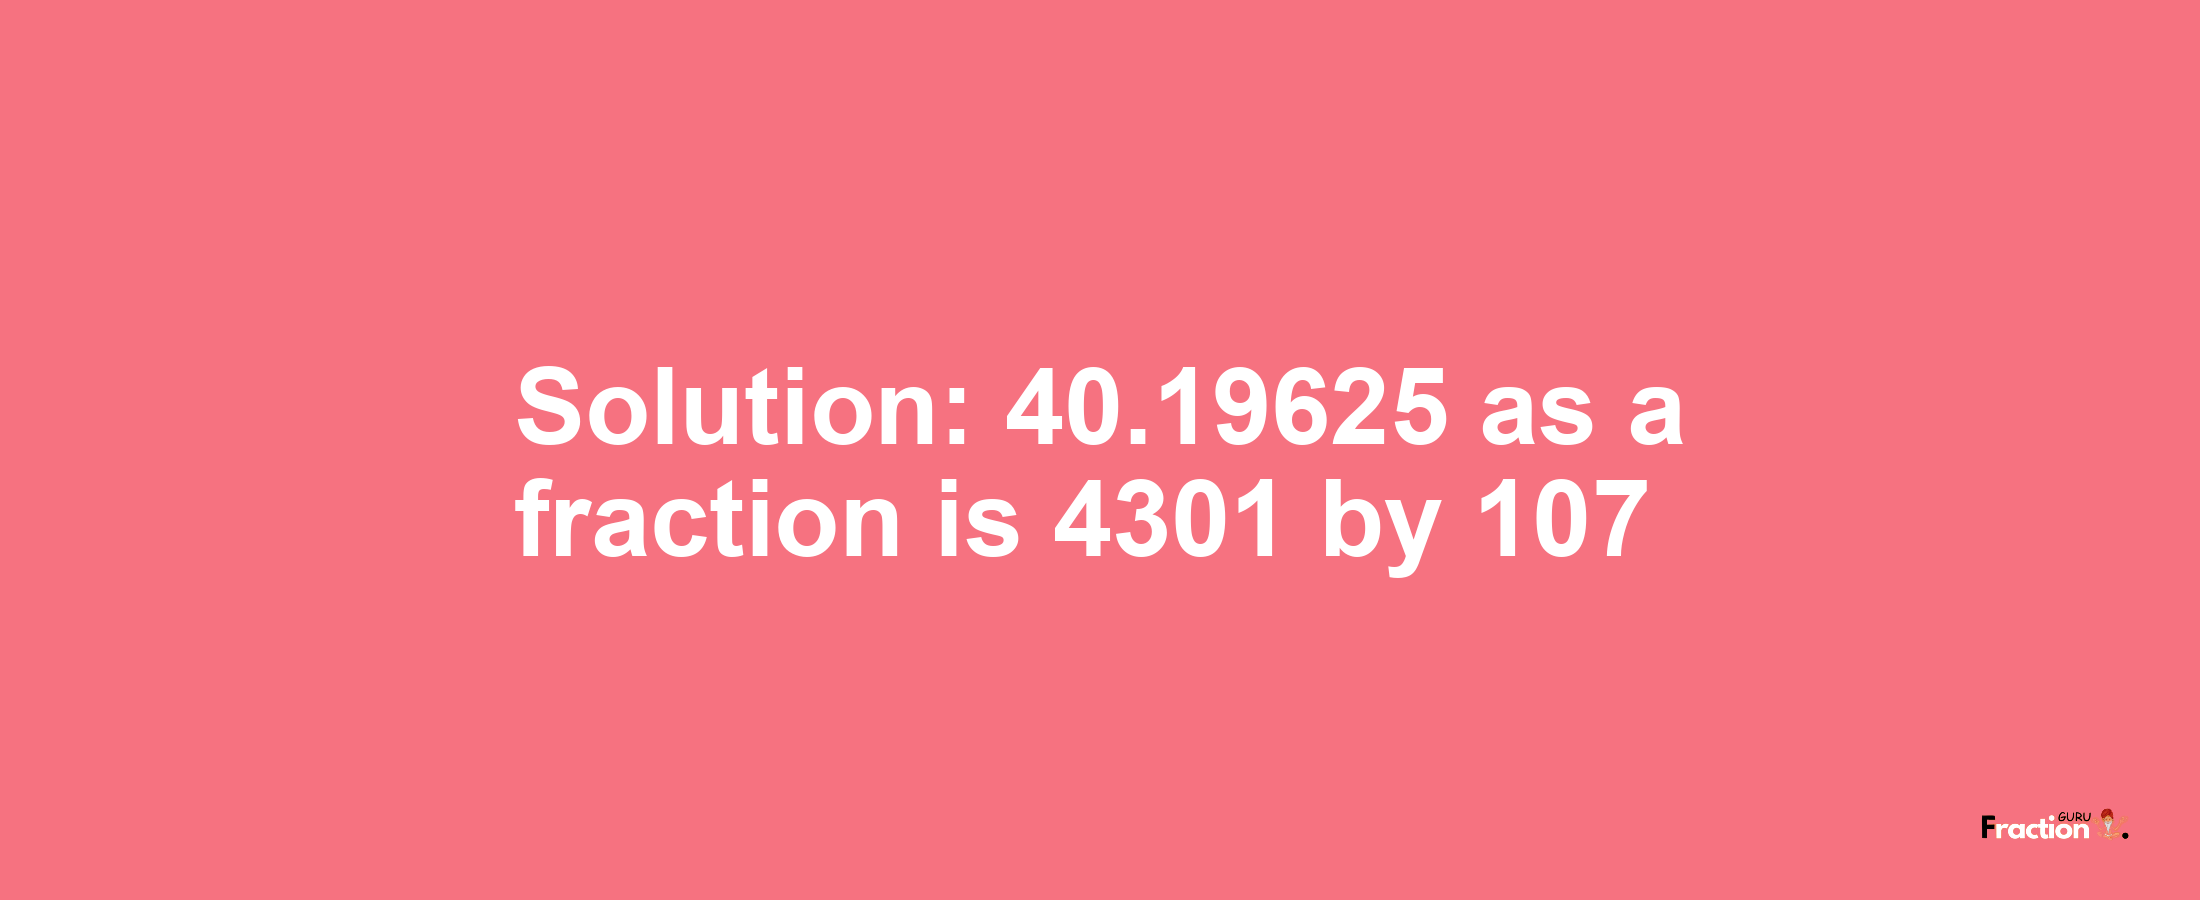 Solution:40.19625 as a fraction is 4301/107